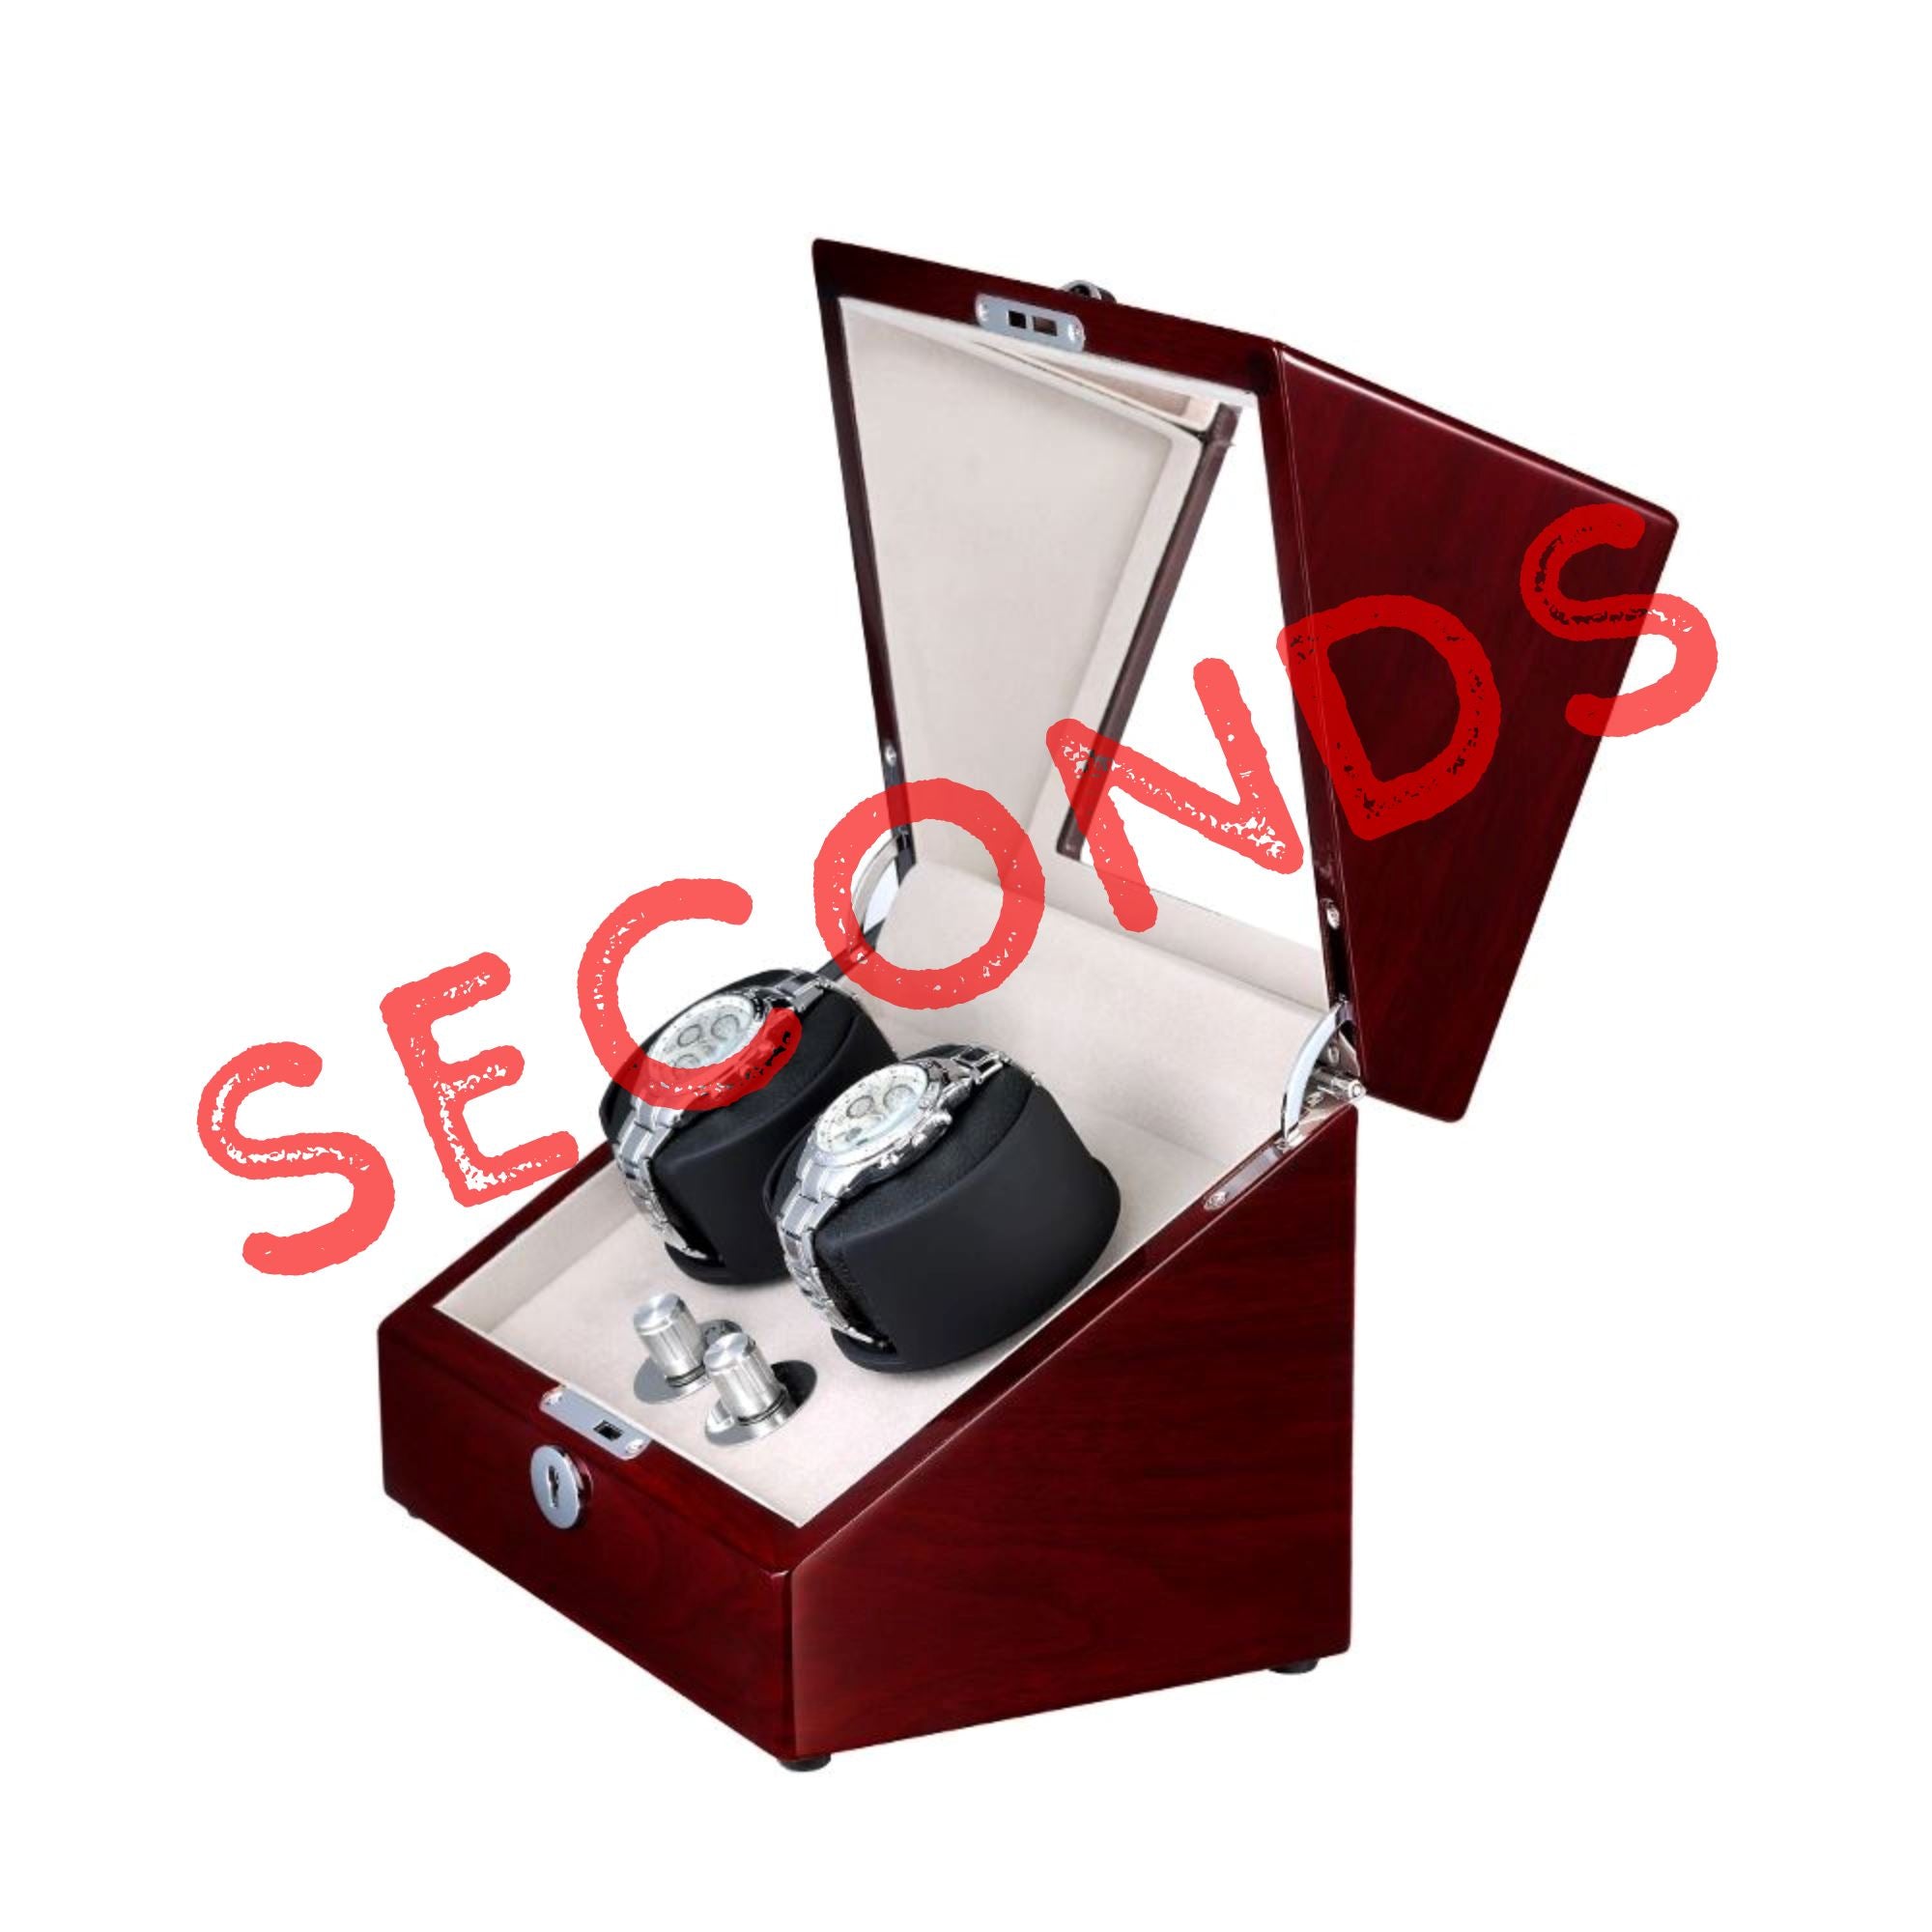 Seconds - Waratah Mahogany Watch Winder Box for 2 Watches (f) Seconds Clinks 